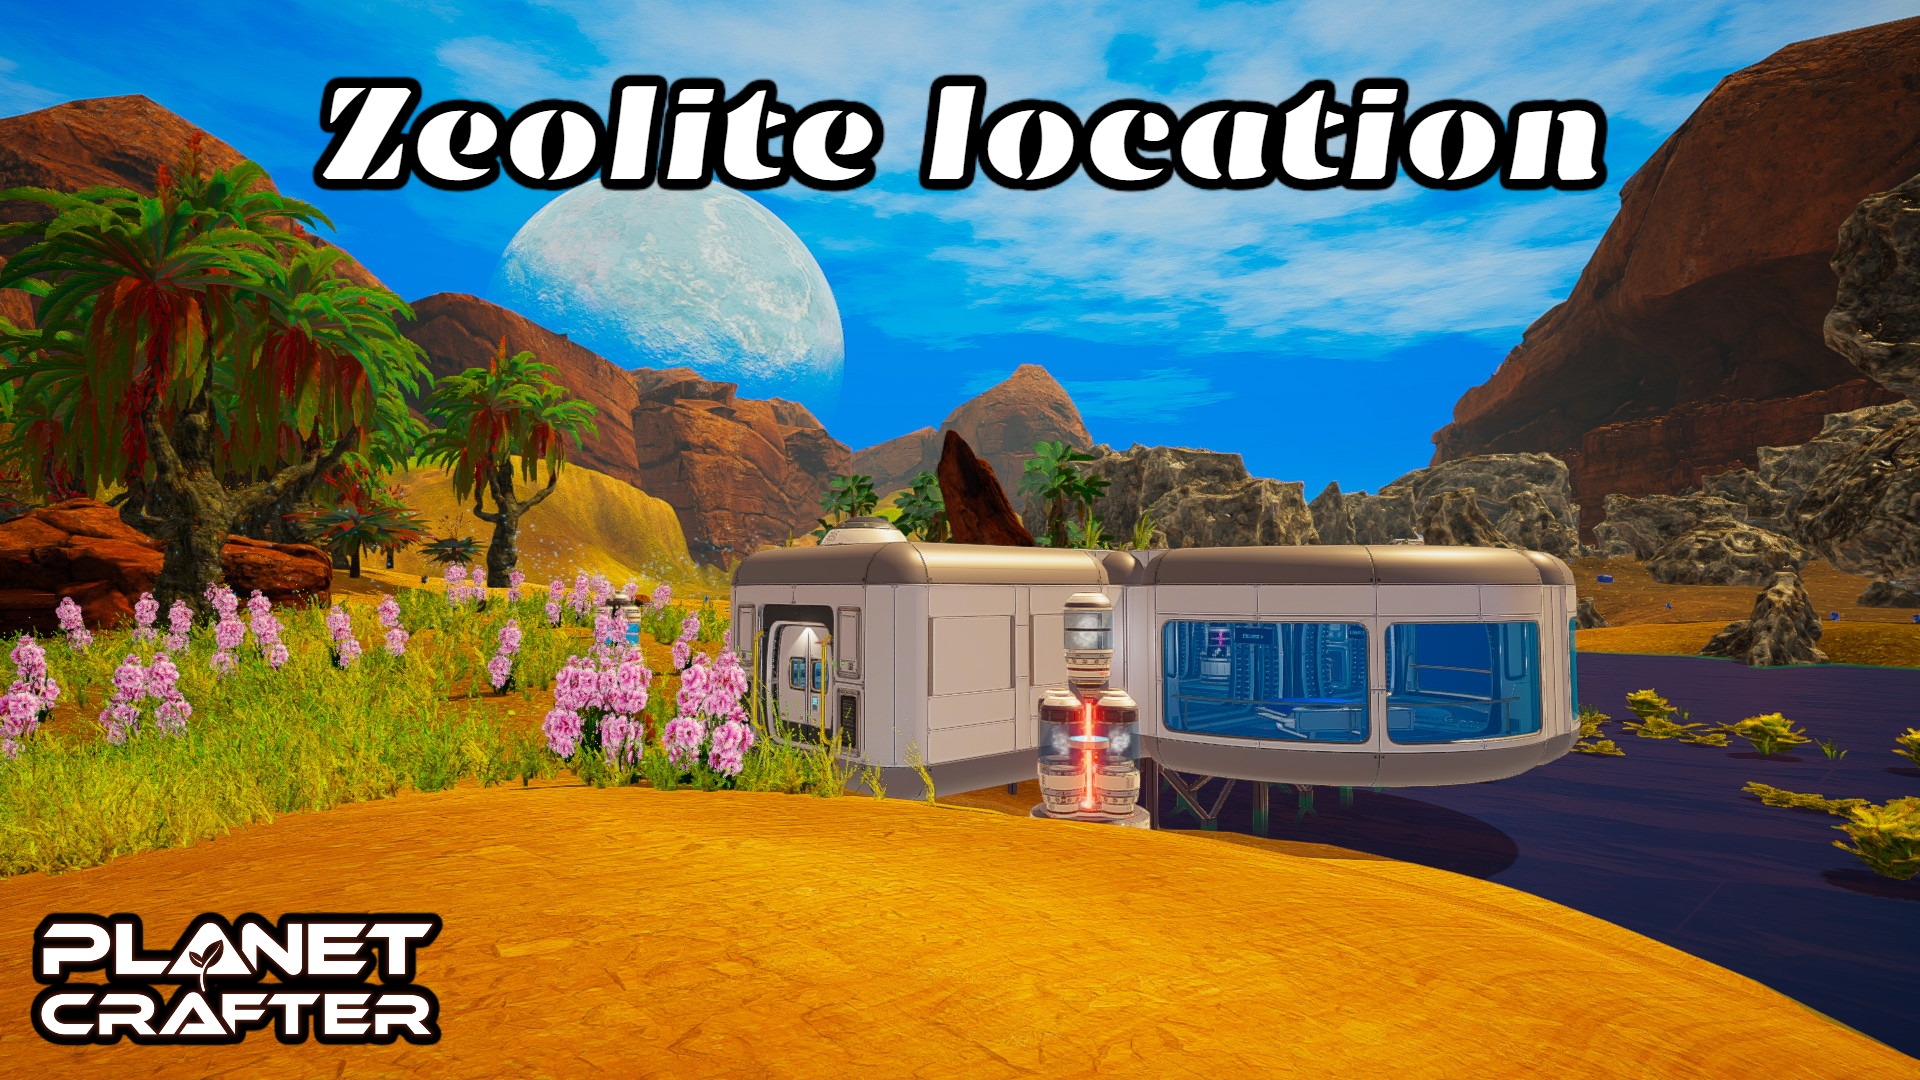 You are currently viewing Zeolite location in The Planet Crafter